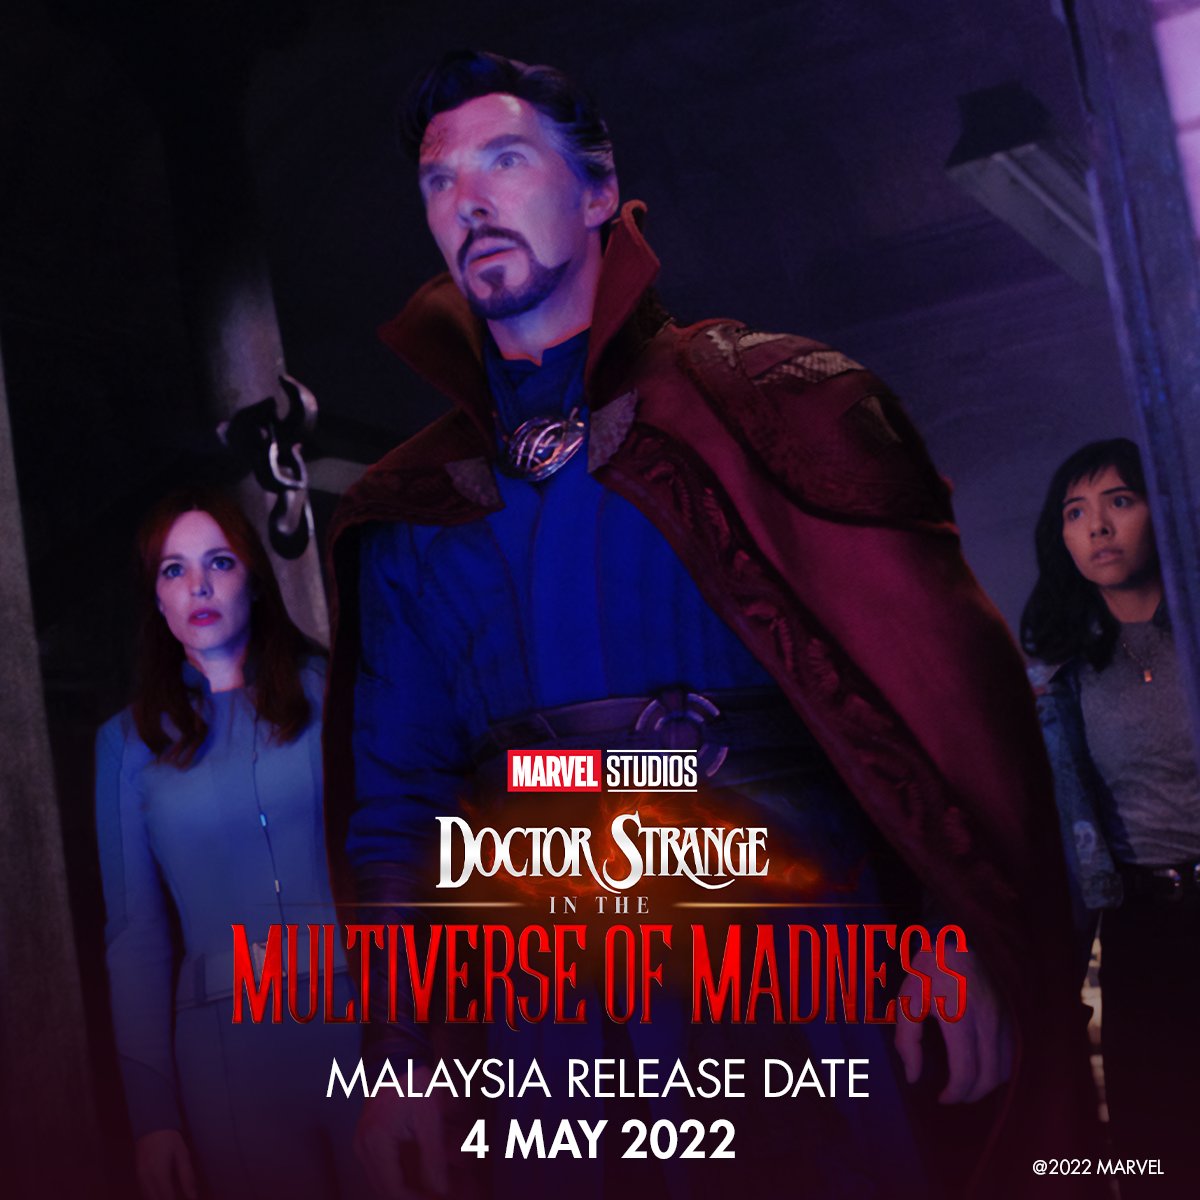 Multiverse malaysia of madness strange date dr release Doctor Strange